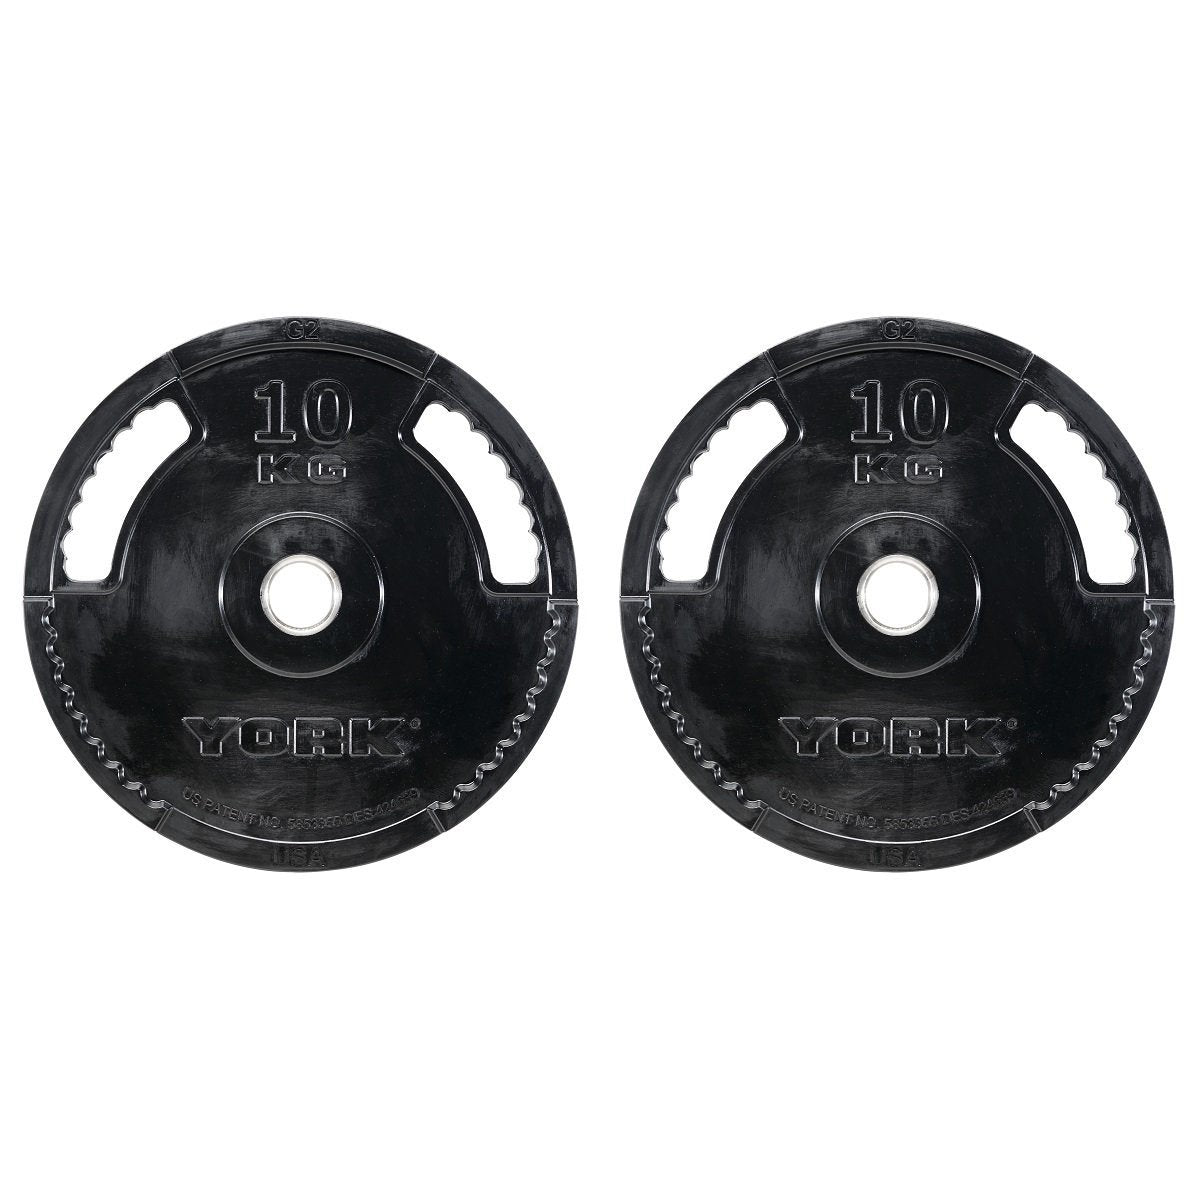 York 2 x 10kg G2 Rubber Thin Line Olympic Weight Plates